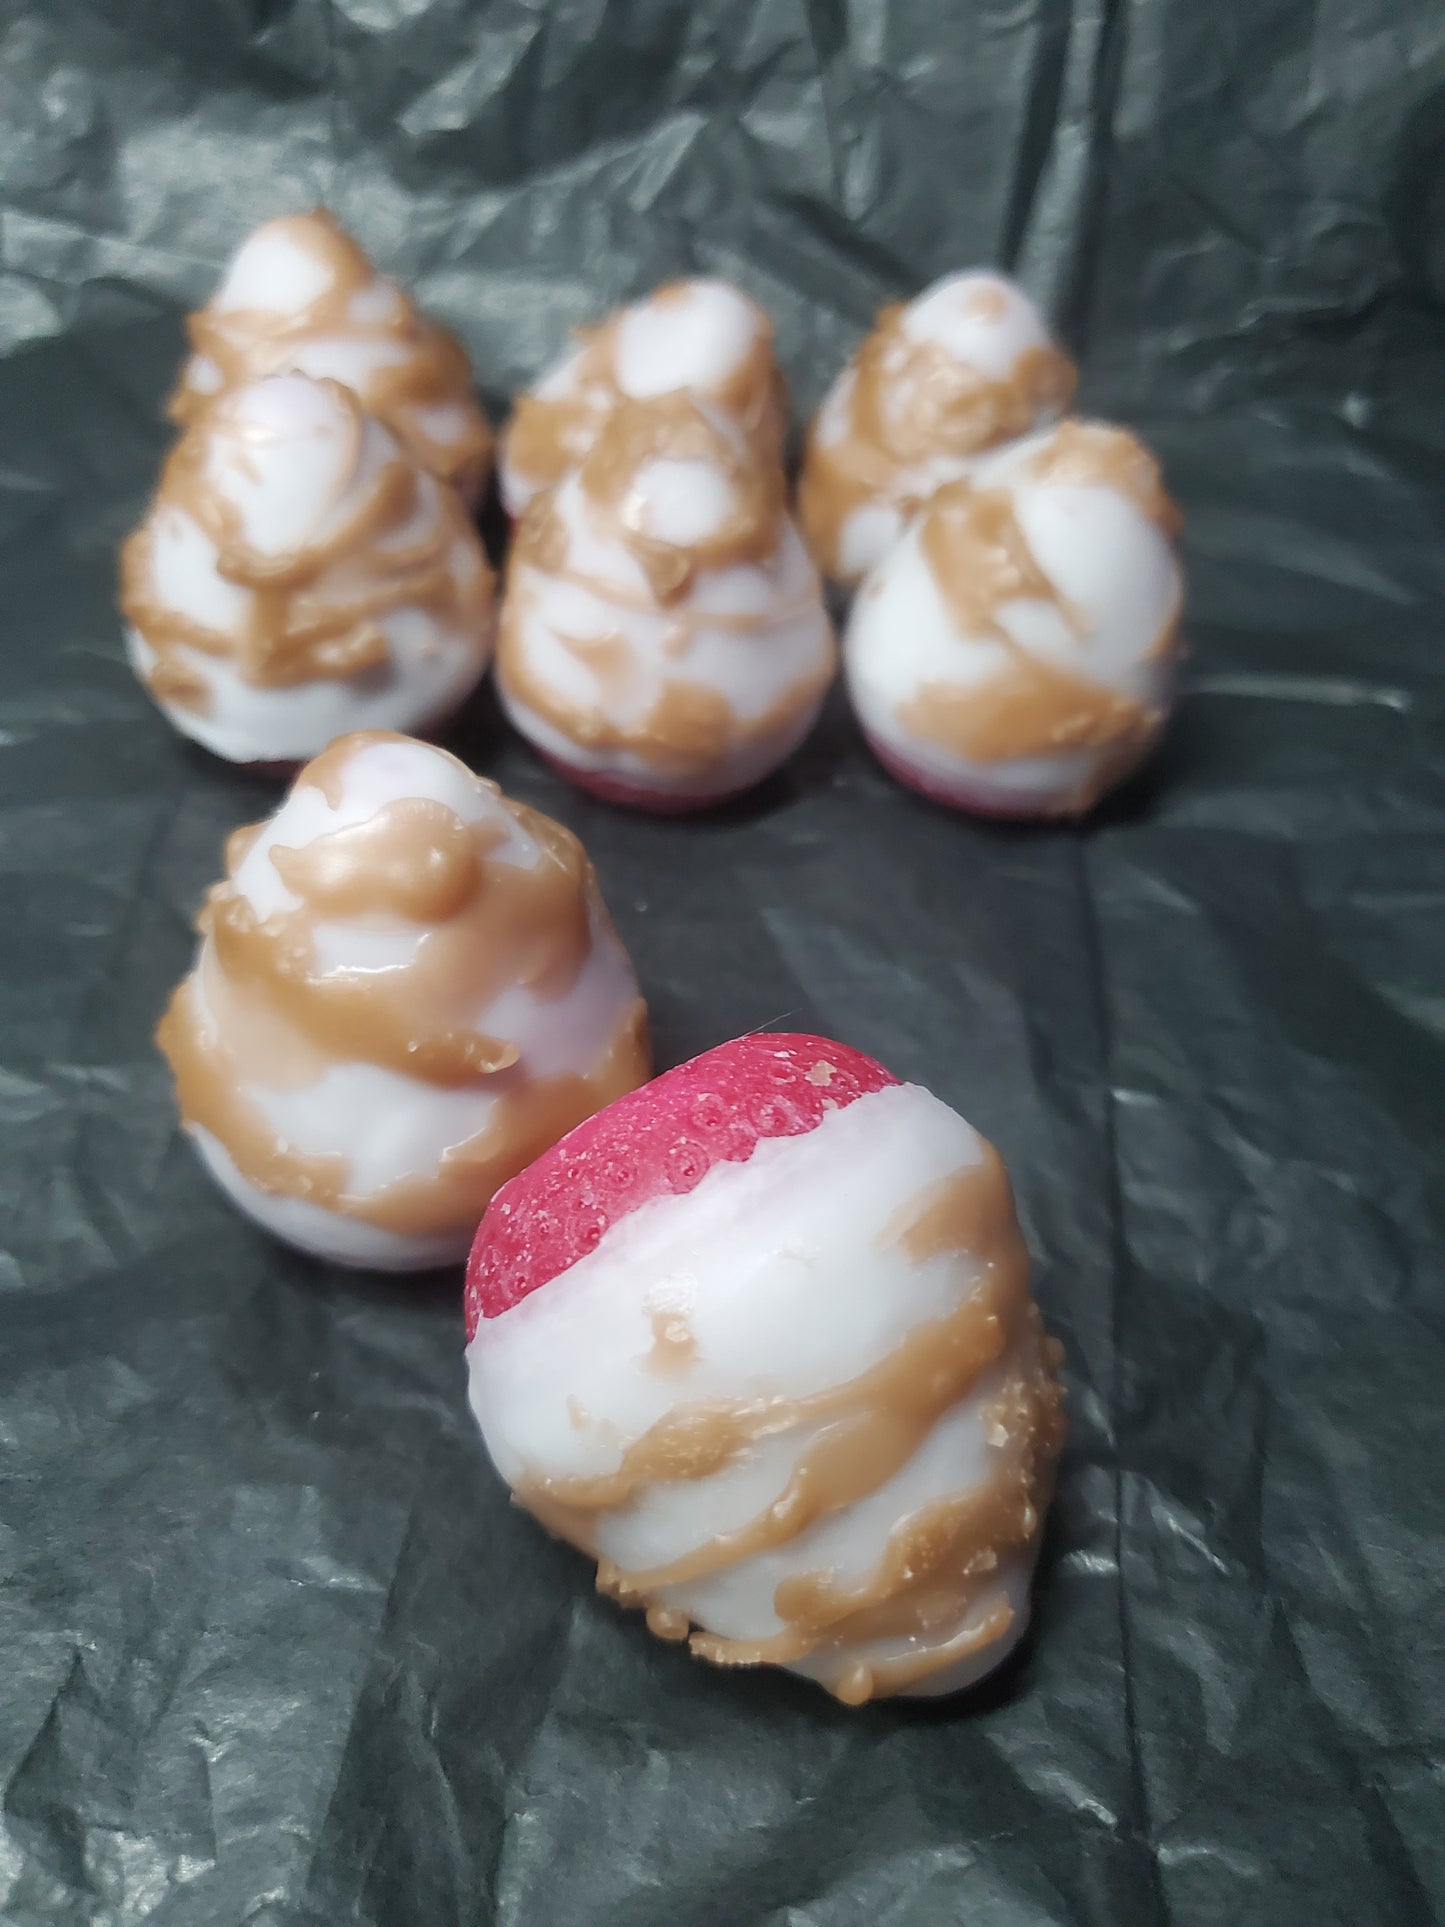 Vinalla creme Dipped Stawberries with milk chocolate drizzle wax melts